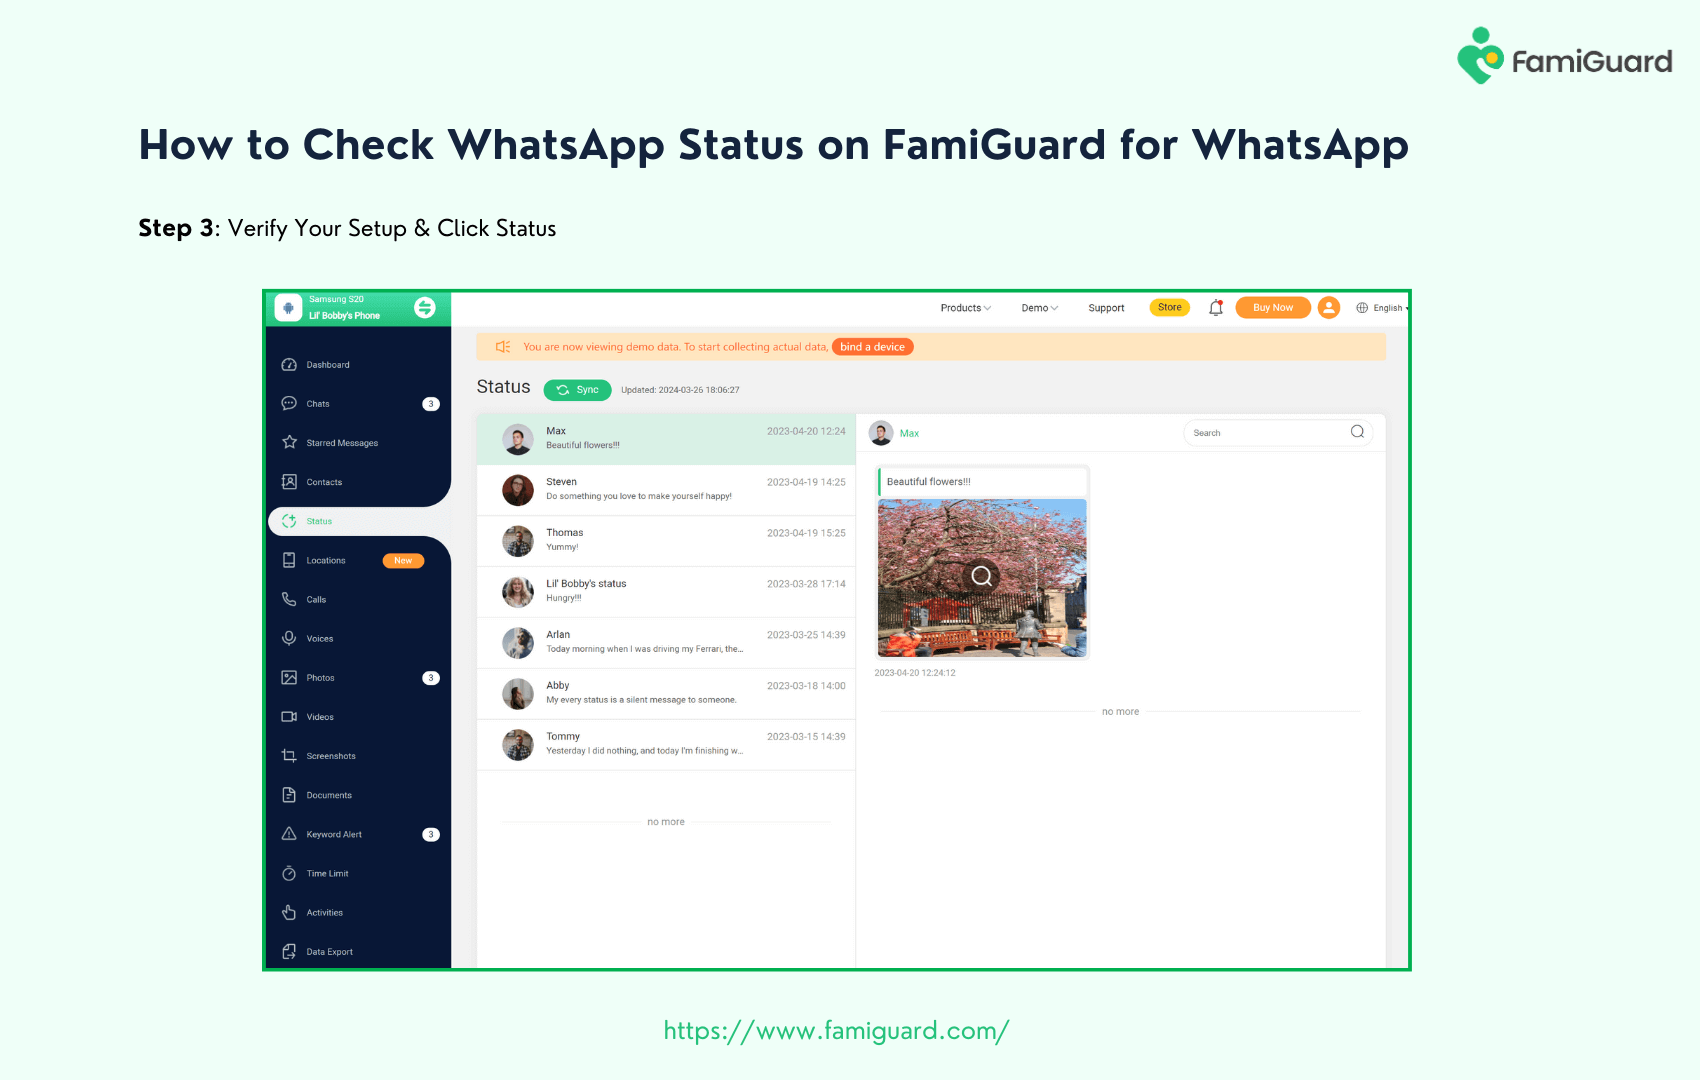 How to Check WhatsApp Status on FamiGuard for WhatsApp